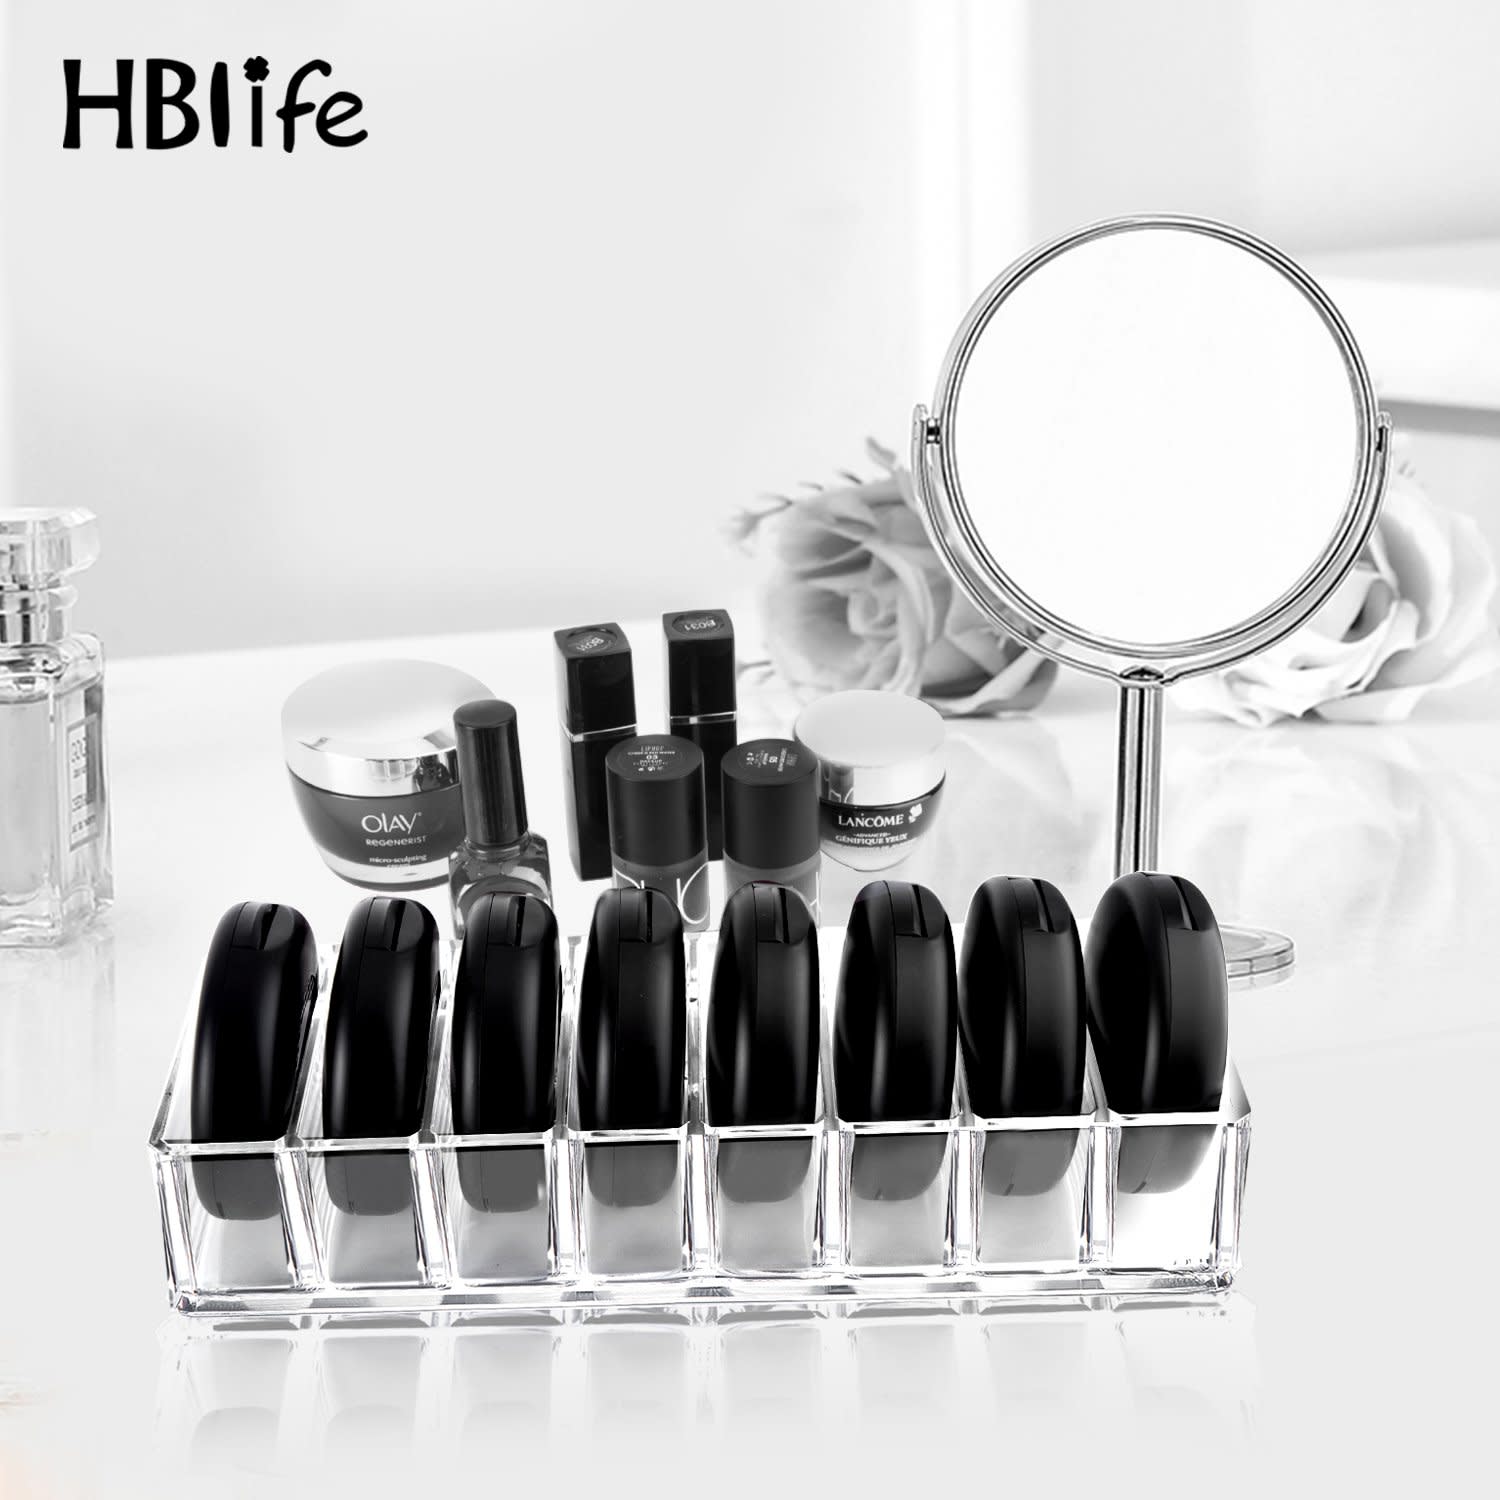 9 Bathroom Organizers from  for your Makeup & Hair Products! - I Spy  Fabulous